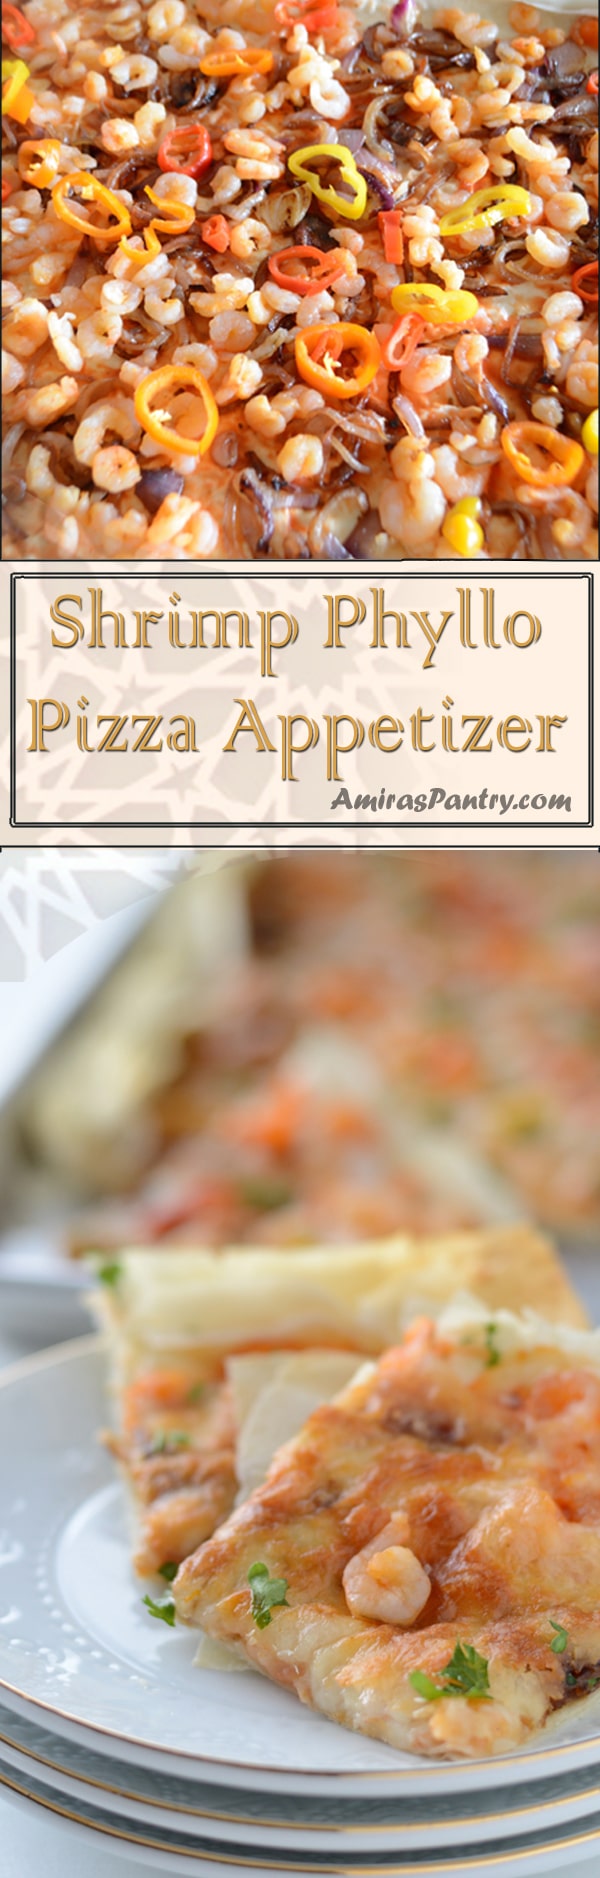 An infograph for Pizza appetizer recipe